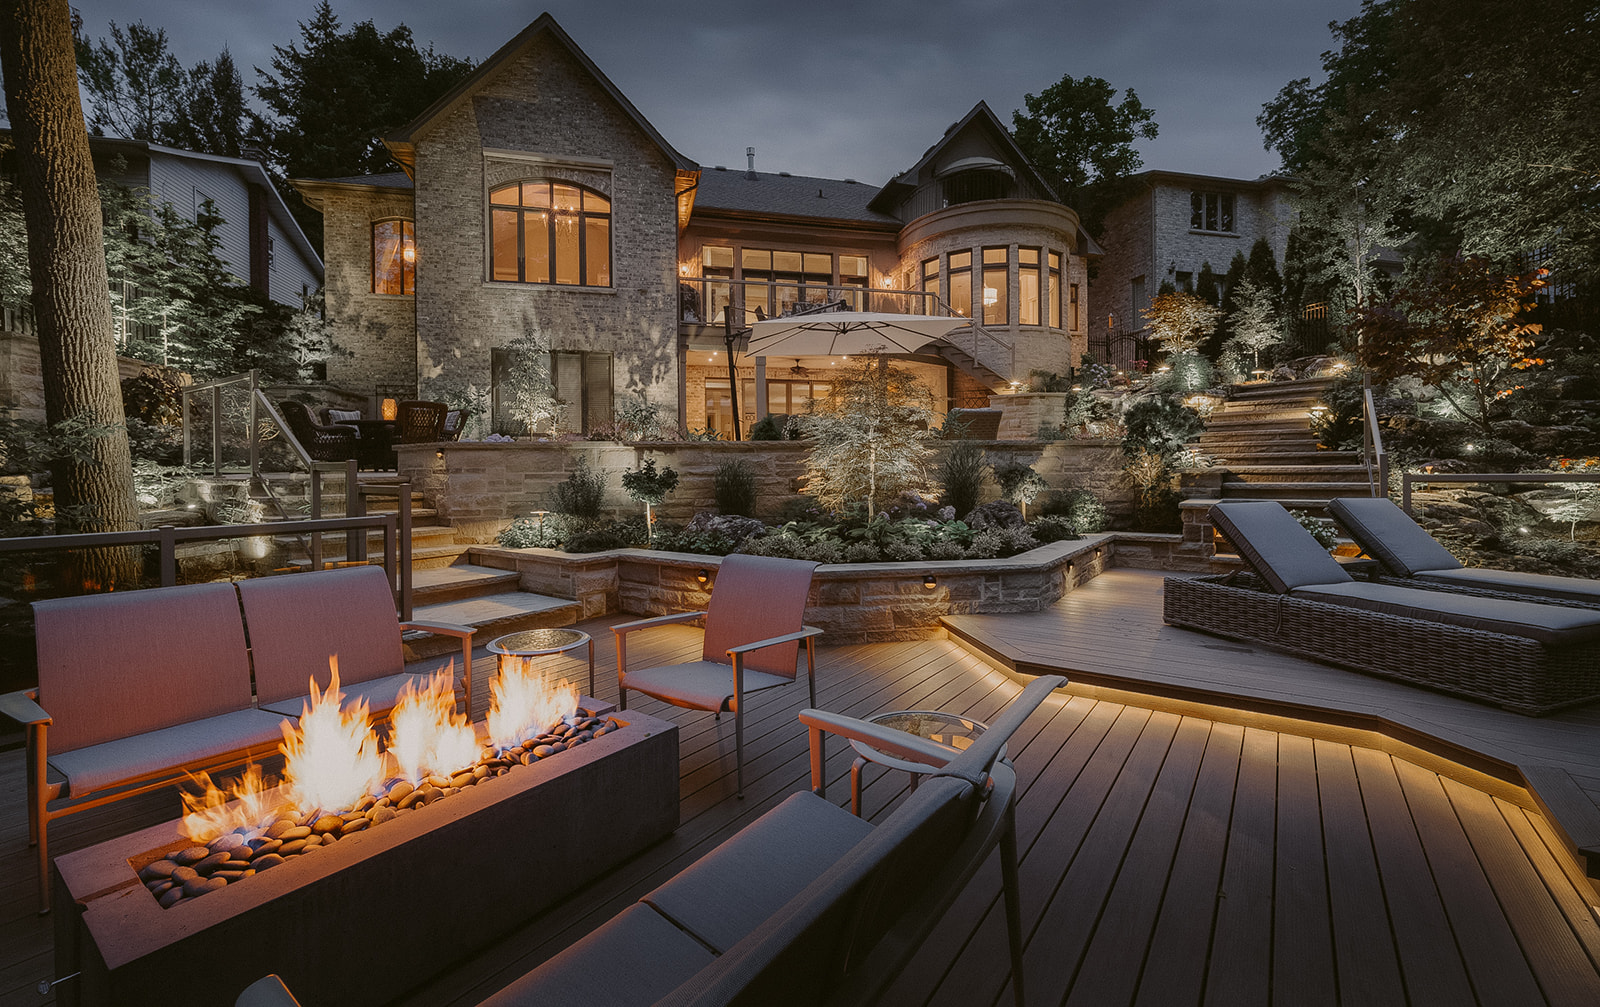 Grand outdoor living area enhanced by a glowing Dekko firepit, setting a welcoming tone for entertainment and cozy gatherings.